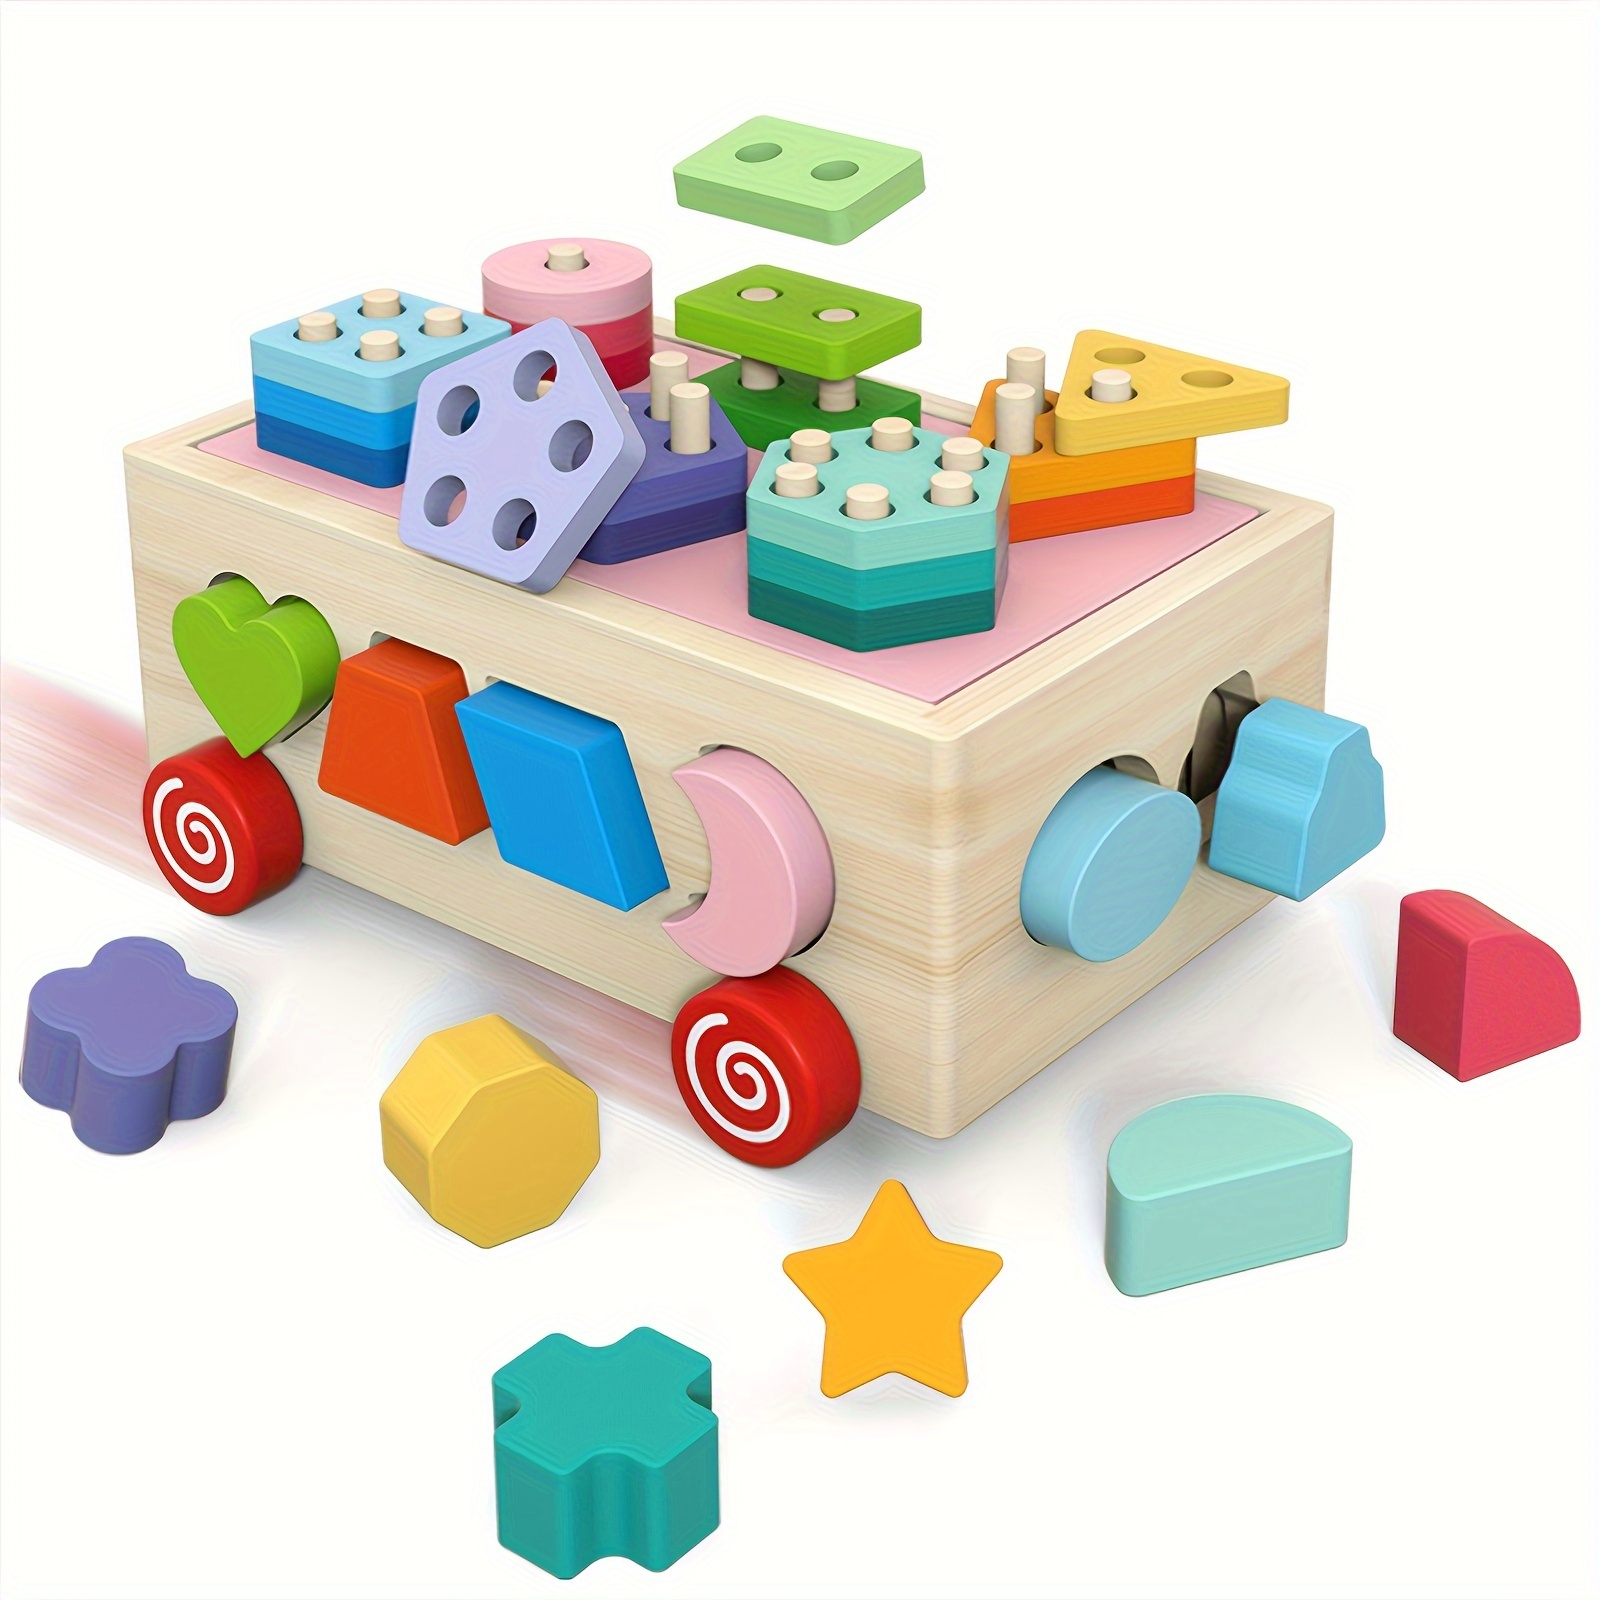 Children's Educational Toys Wooden Learning Box Educational Toys